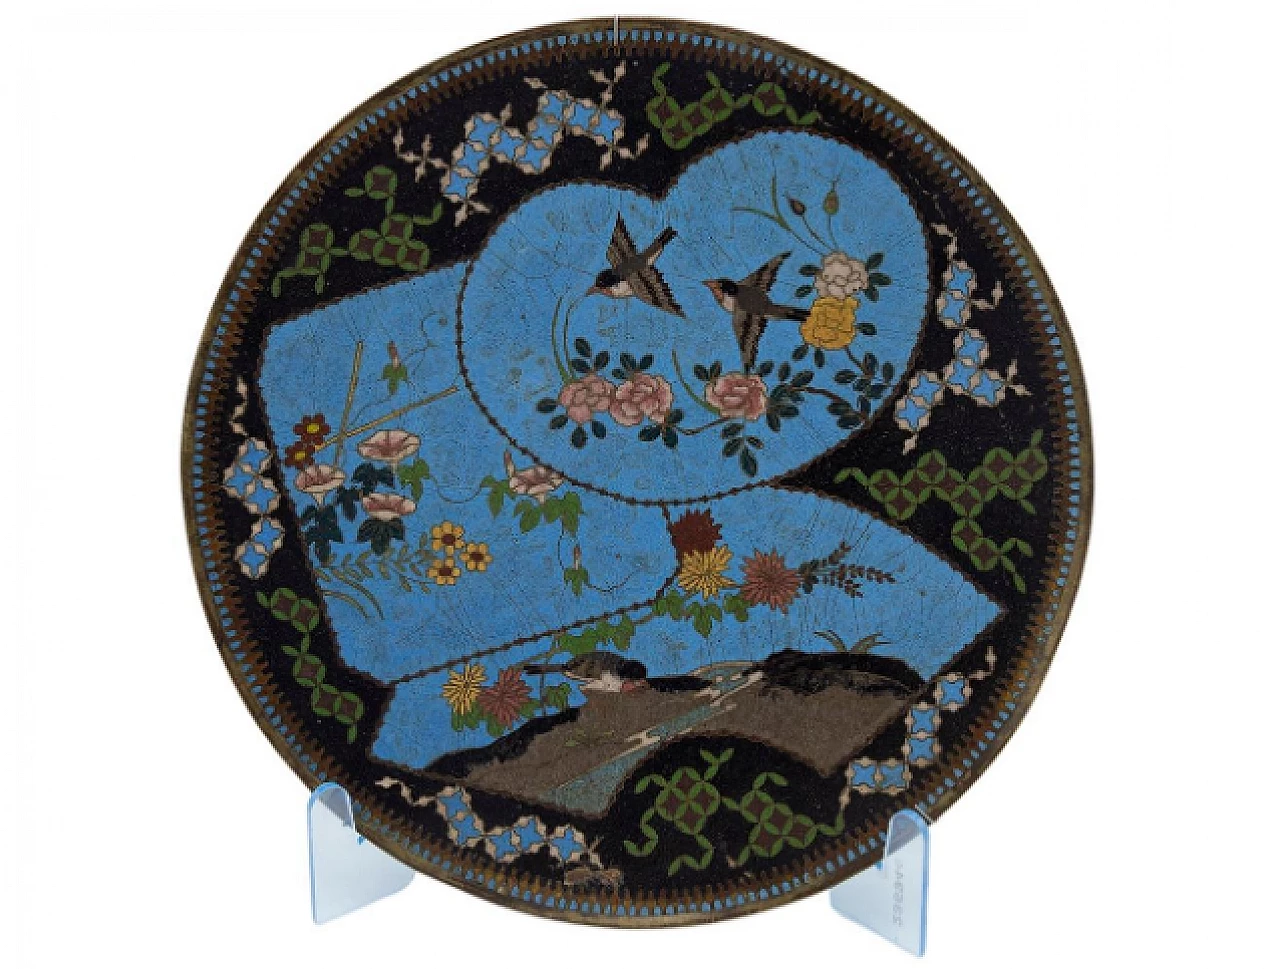 Chinese bronze and cloisonné enamel decorative plate with birds and flowers 1